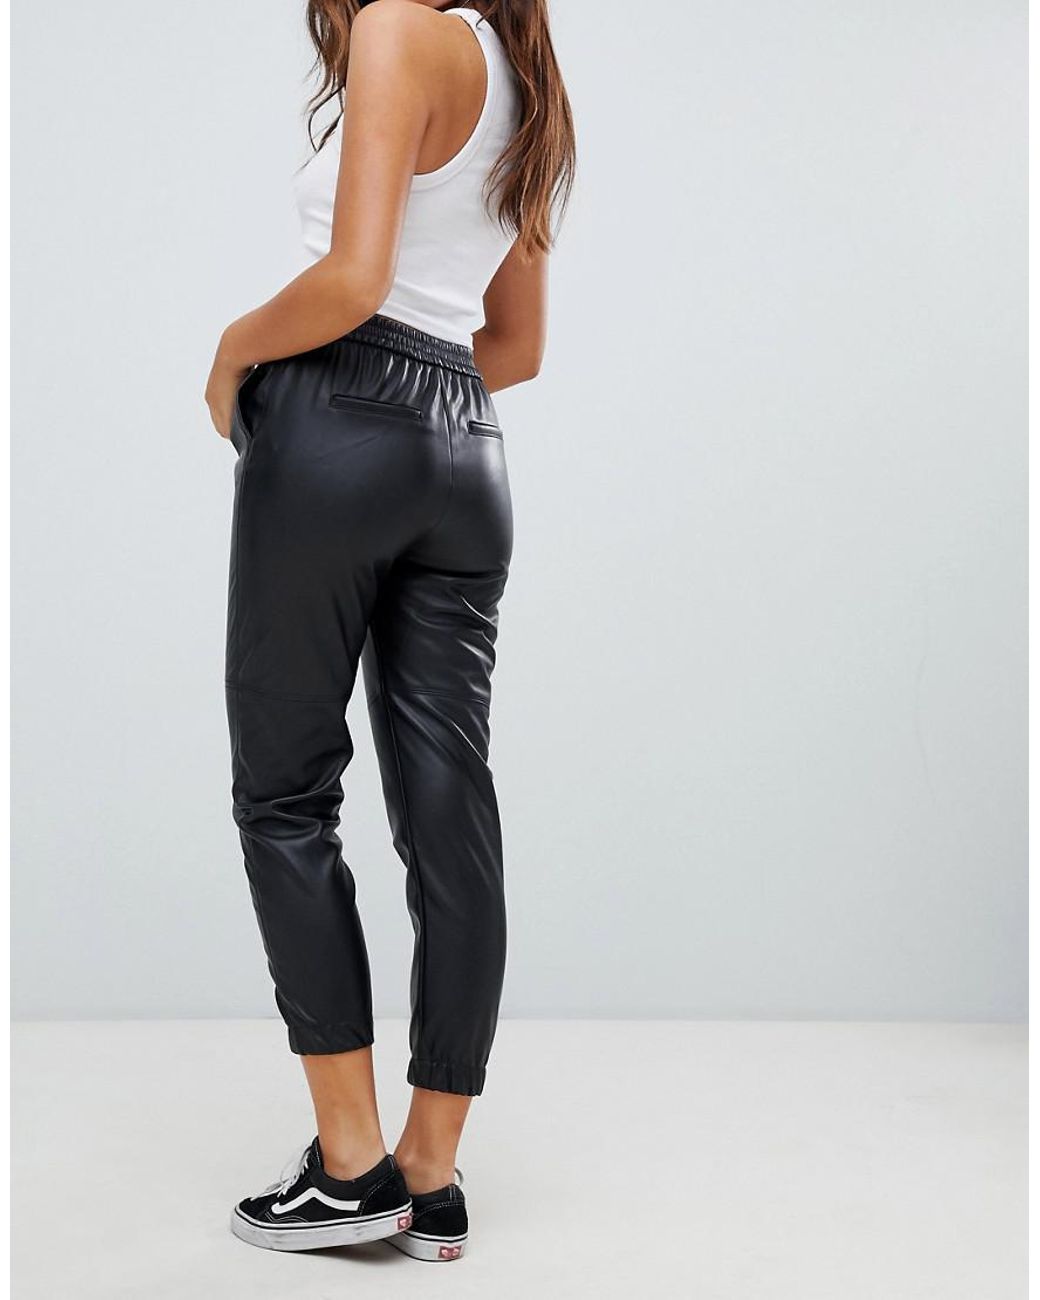 Bershka Denim Button Front Faux Leather Trousers in Black | Lyst